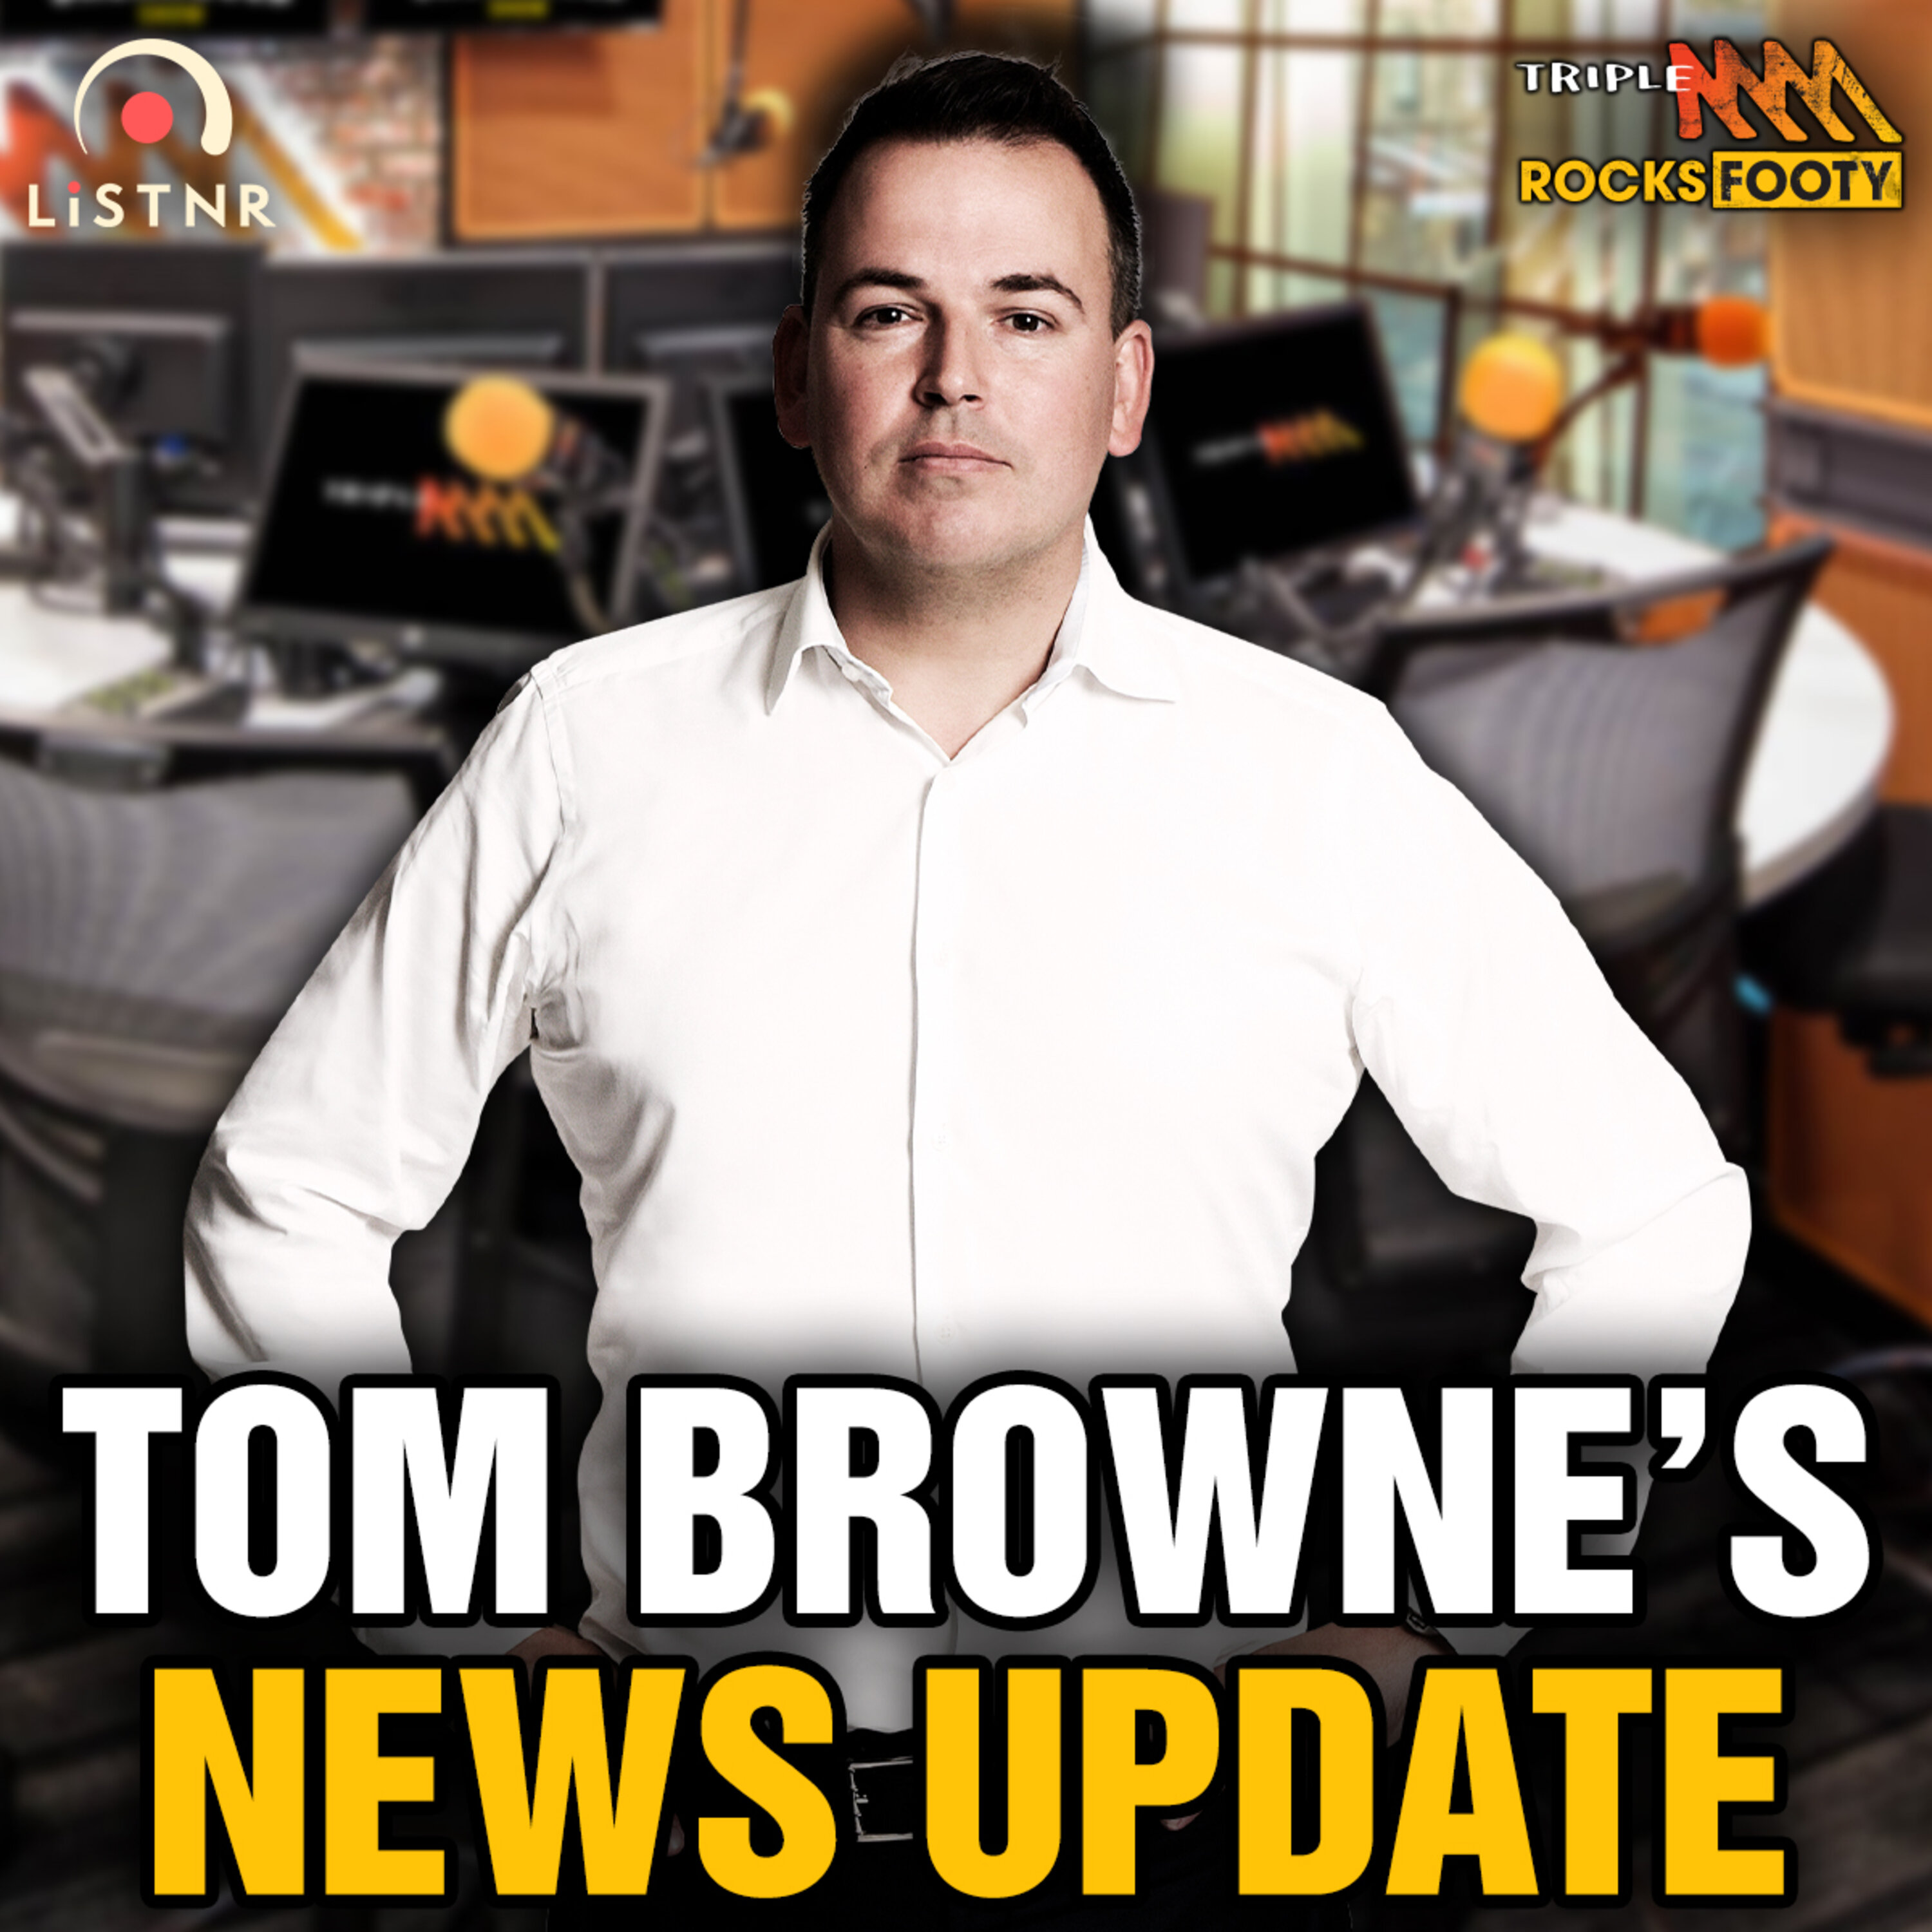 Tom Browne's News | Richmond's search for their next coach, the candidates to replace Justin Reeves as Hawthorn CEO, Hawks investigation latest